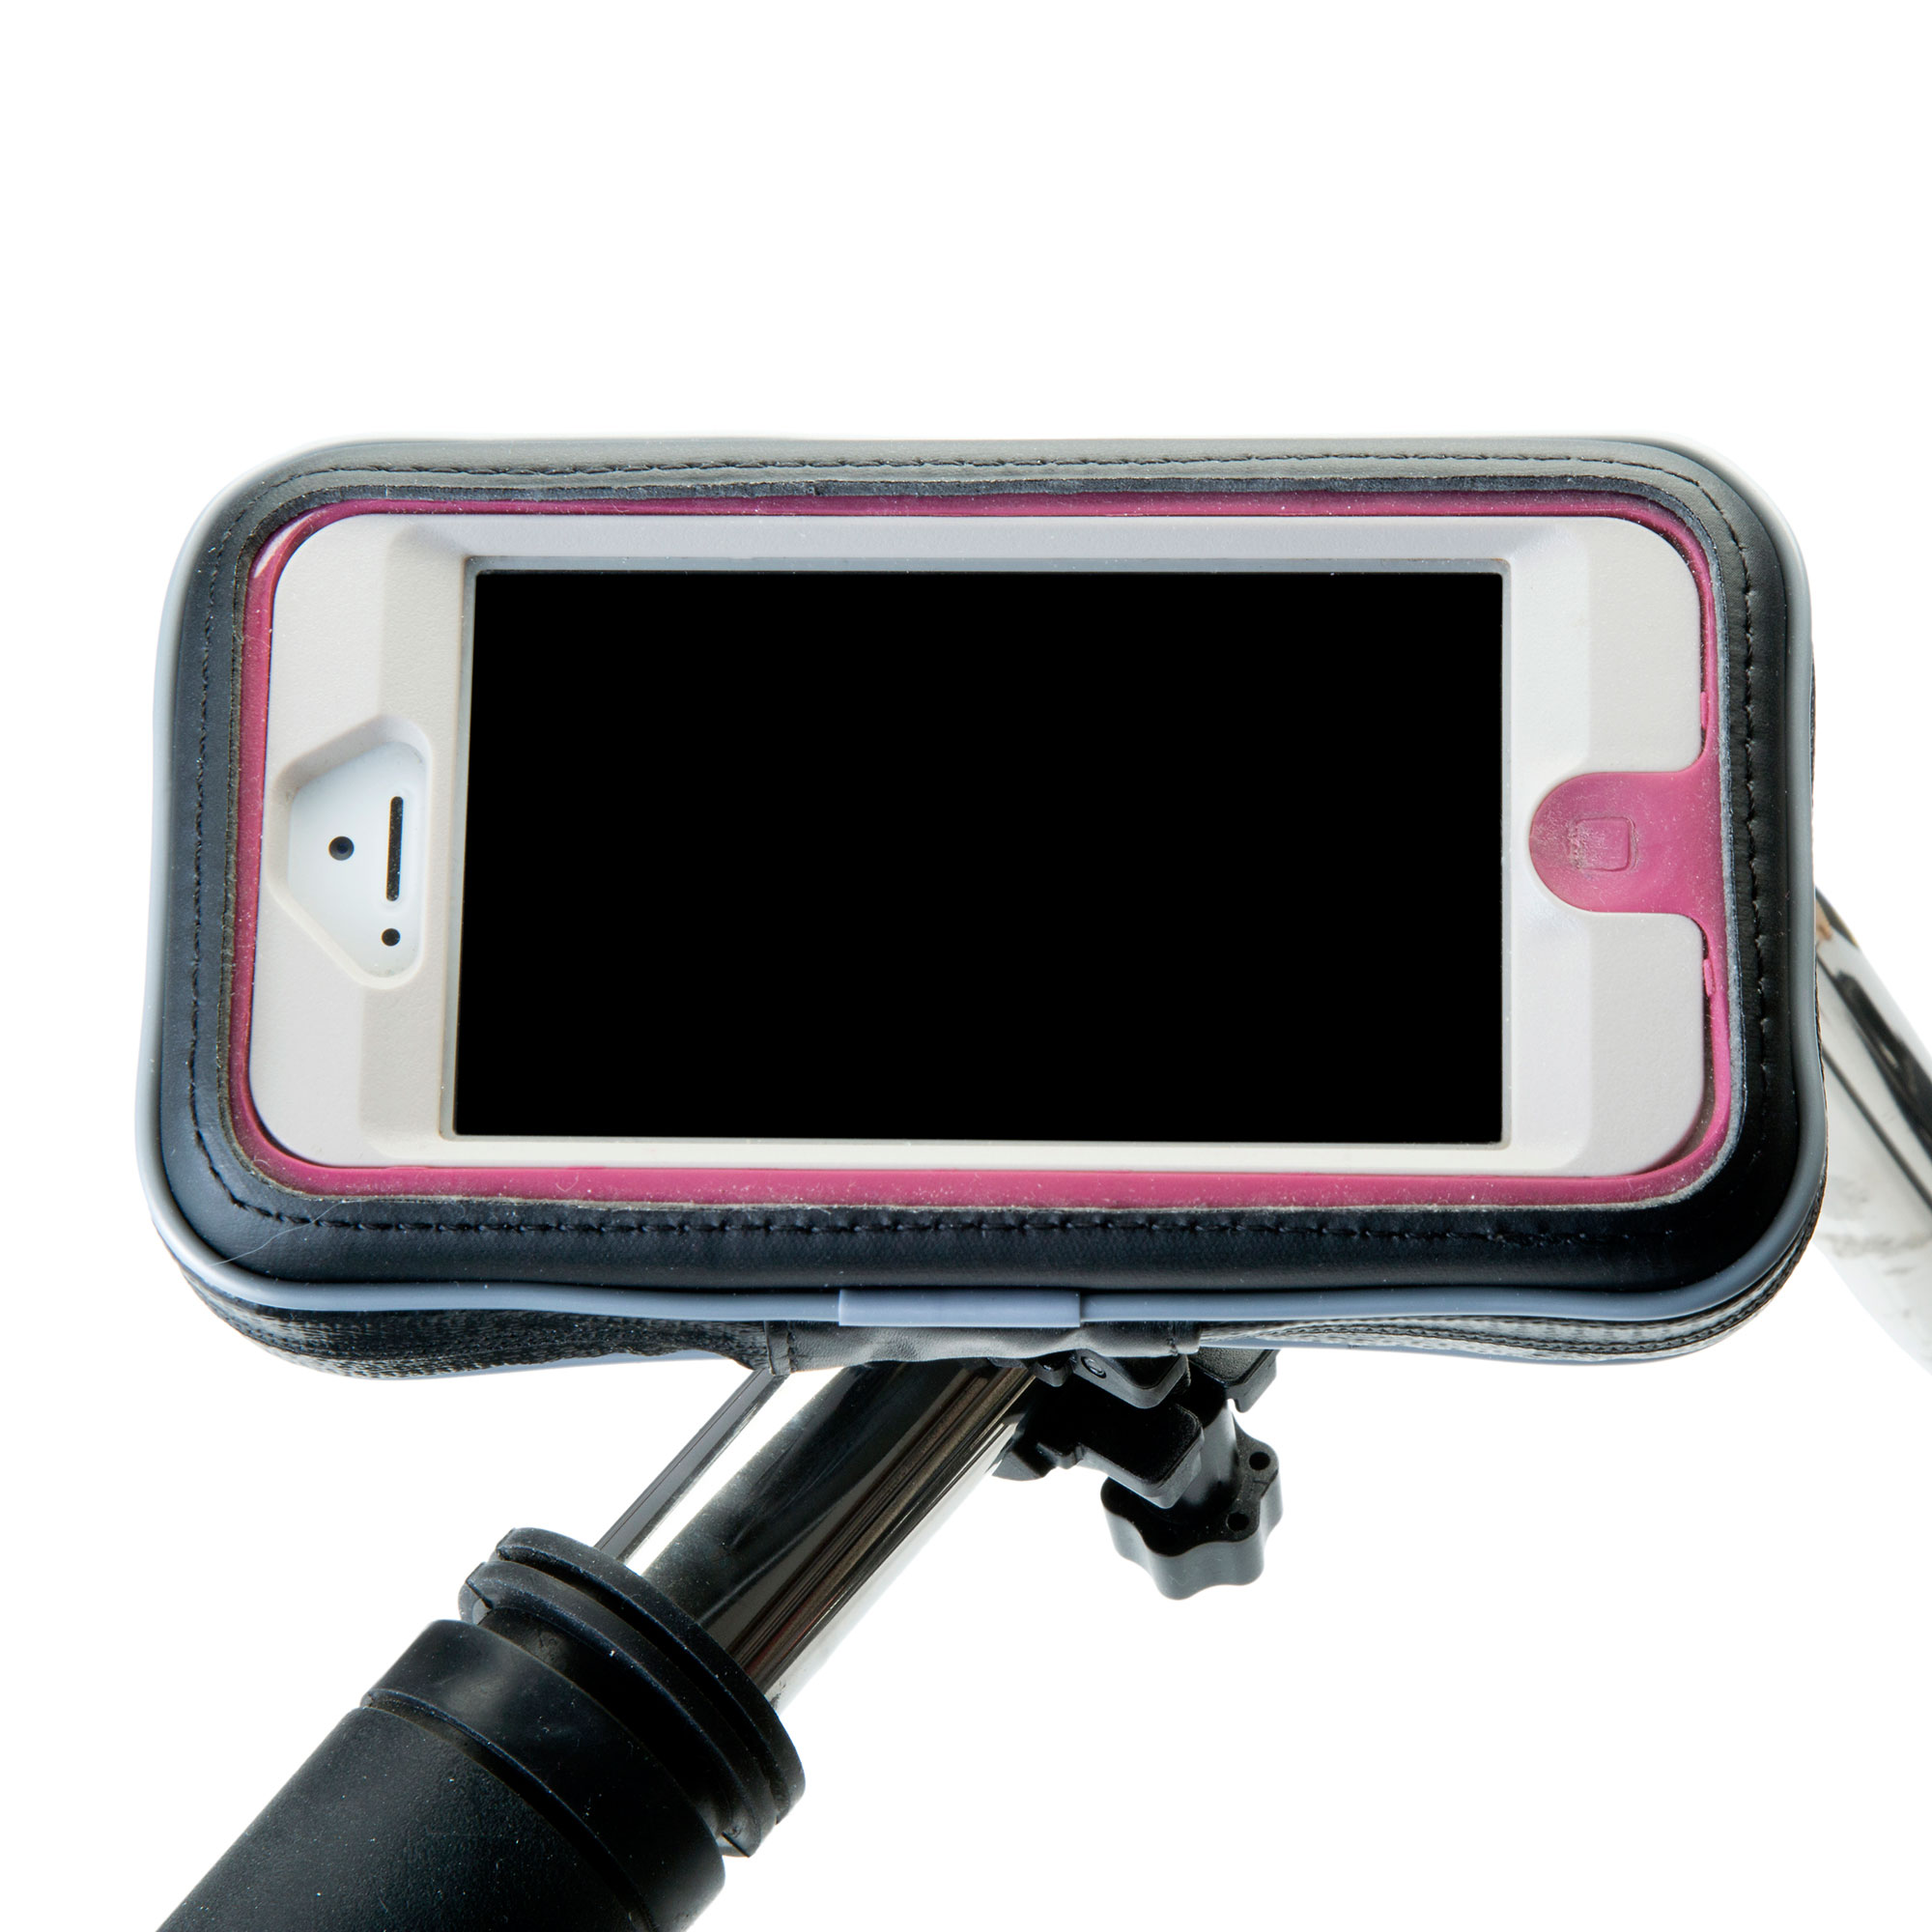 Heavy Duty Weather Resistant Bicycle / Motorcycle Handlebar Mount Holder Designed for the HTC Desire S